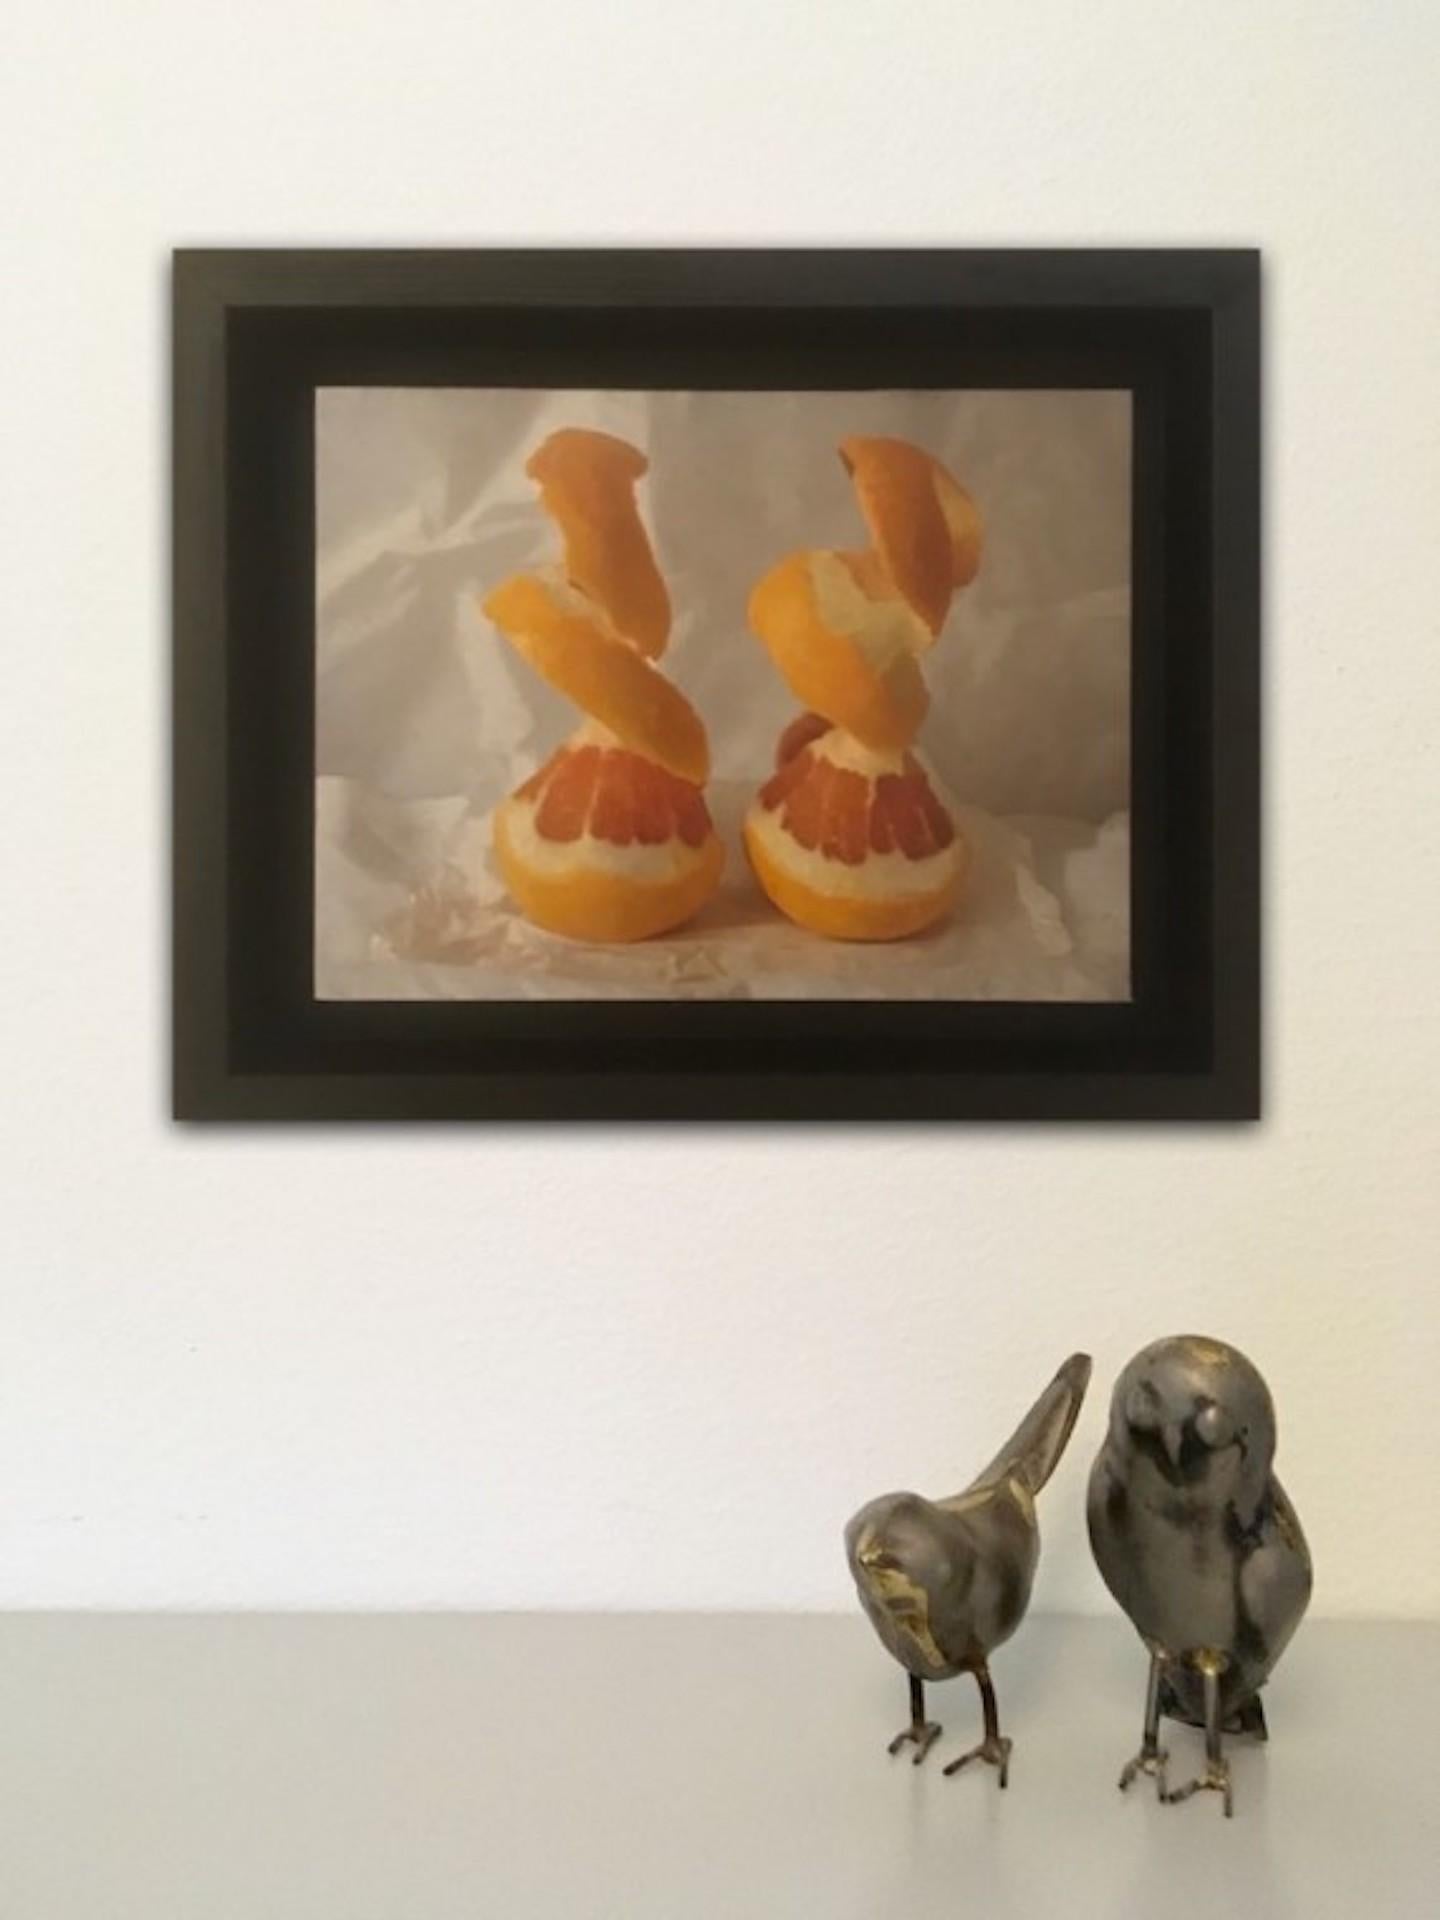 Kate Verrion, Two Peeled Oranges, Affordable Art, Original Still Life Painting 8